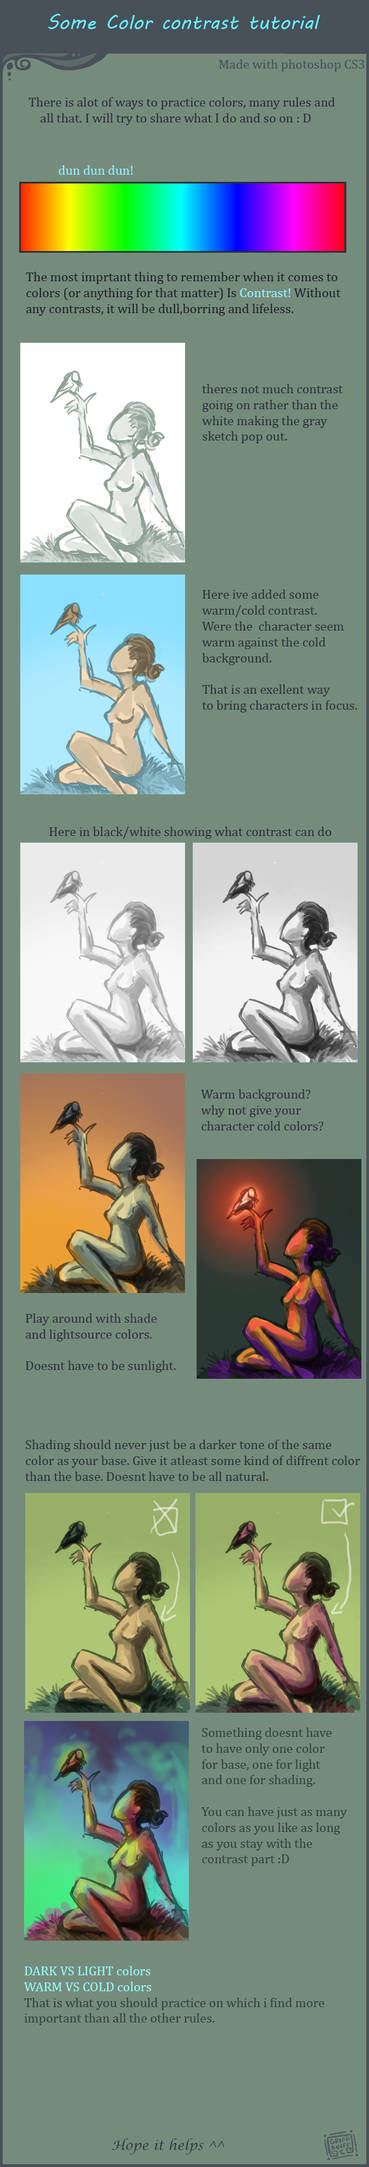 Some color tutorial